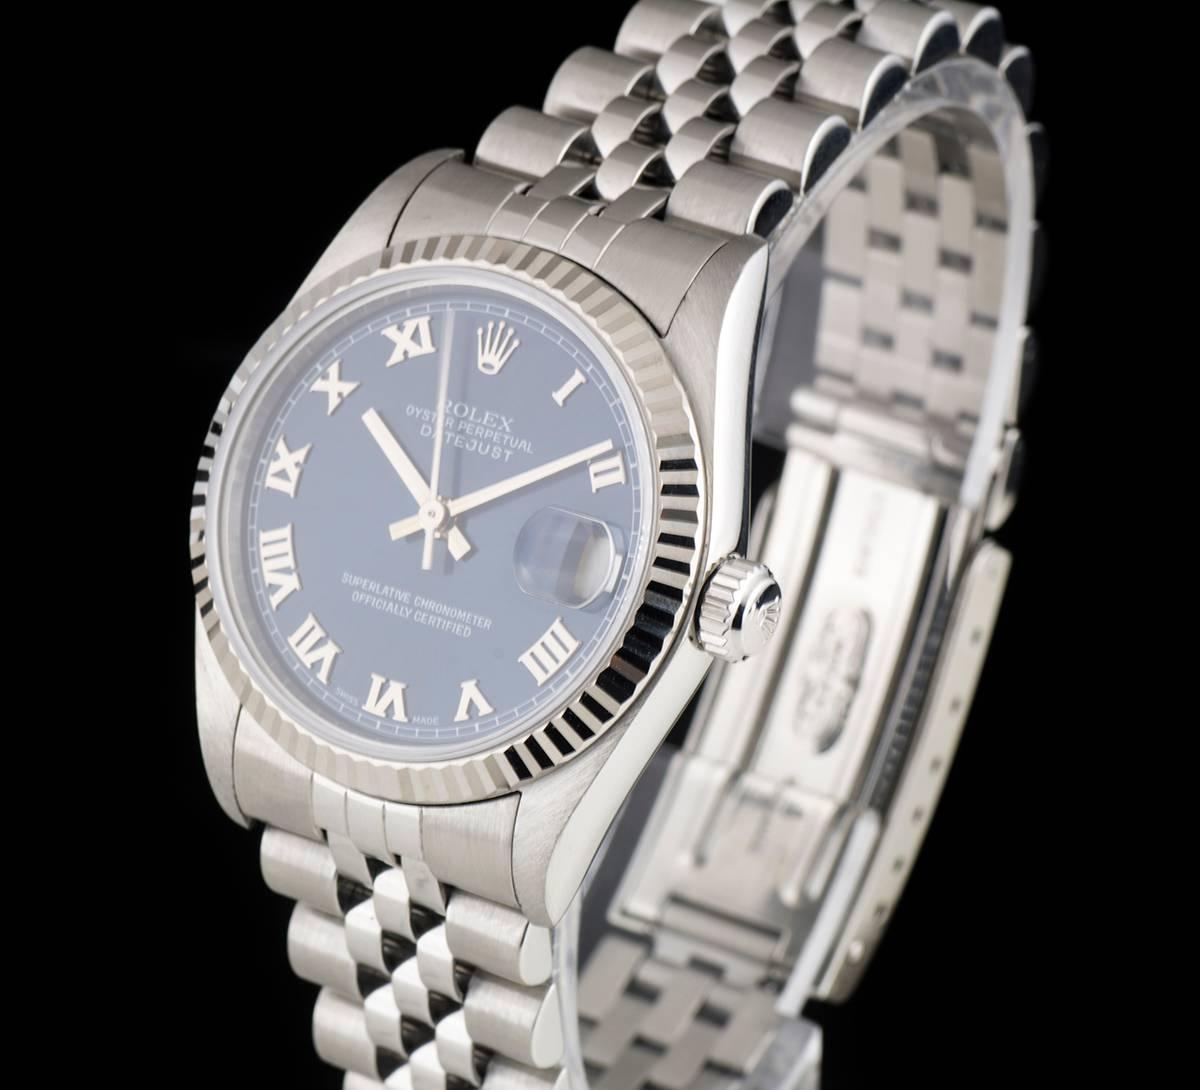 A Stainless Steel Oyster Perpetual Datejust Mid-Size Wristwatch, blue dial with applied roman numerals, date at 3 0'clock, a fixed 18k white gold fluted bezel, a stainless steel jubilee bracelet with a stainless steel deployant clasp, sapphire